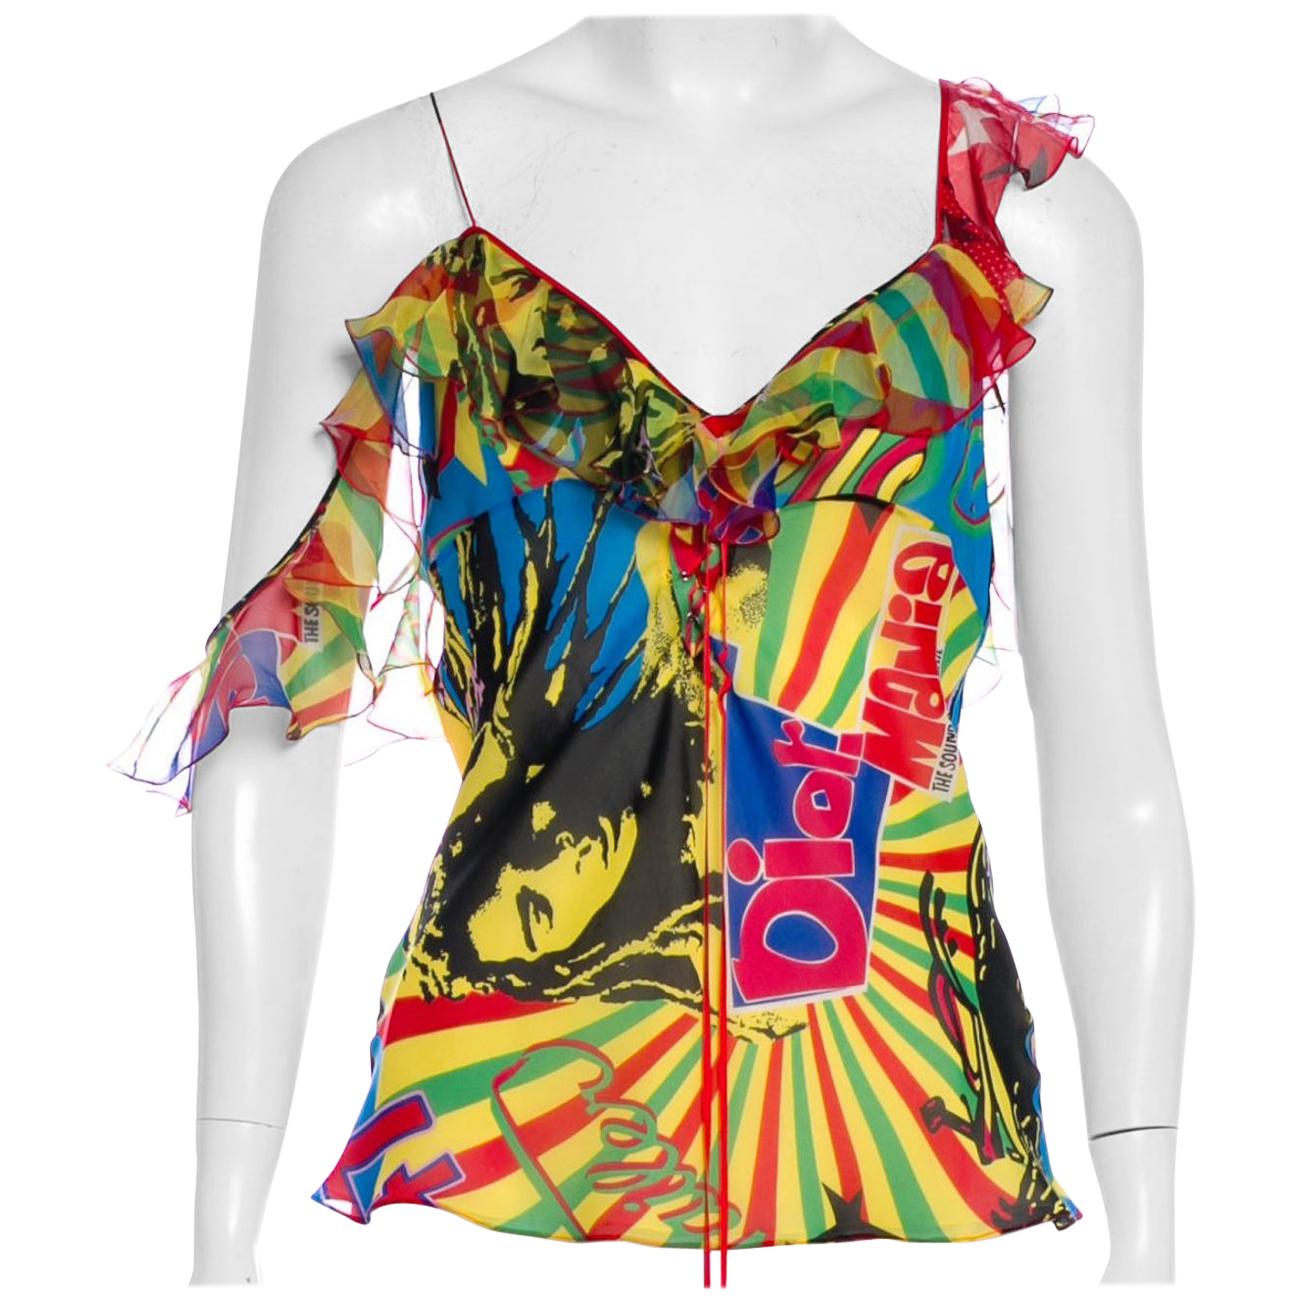 Christian Dior by Galliano 2004 Rasta Collection Silk Top with Chiffon Ruffles For Sale